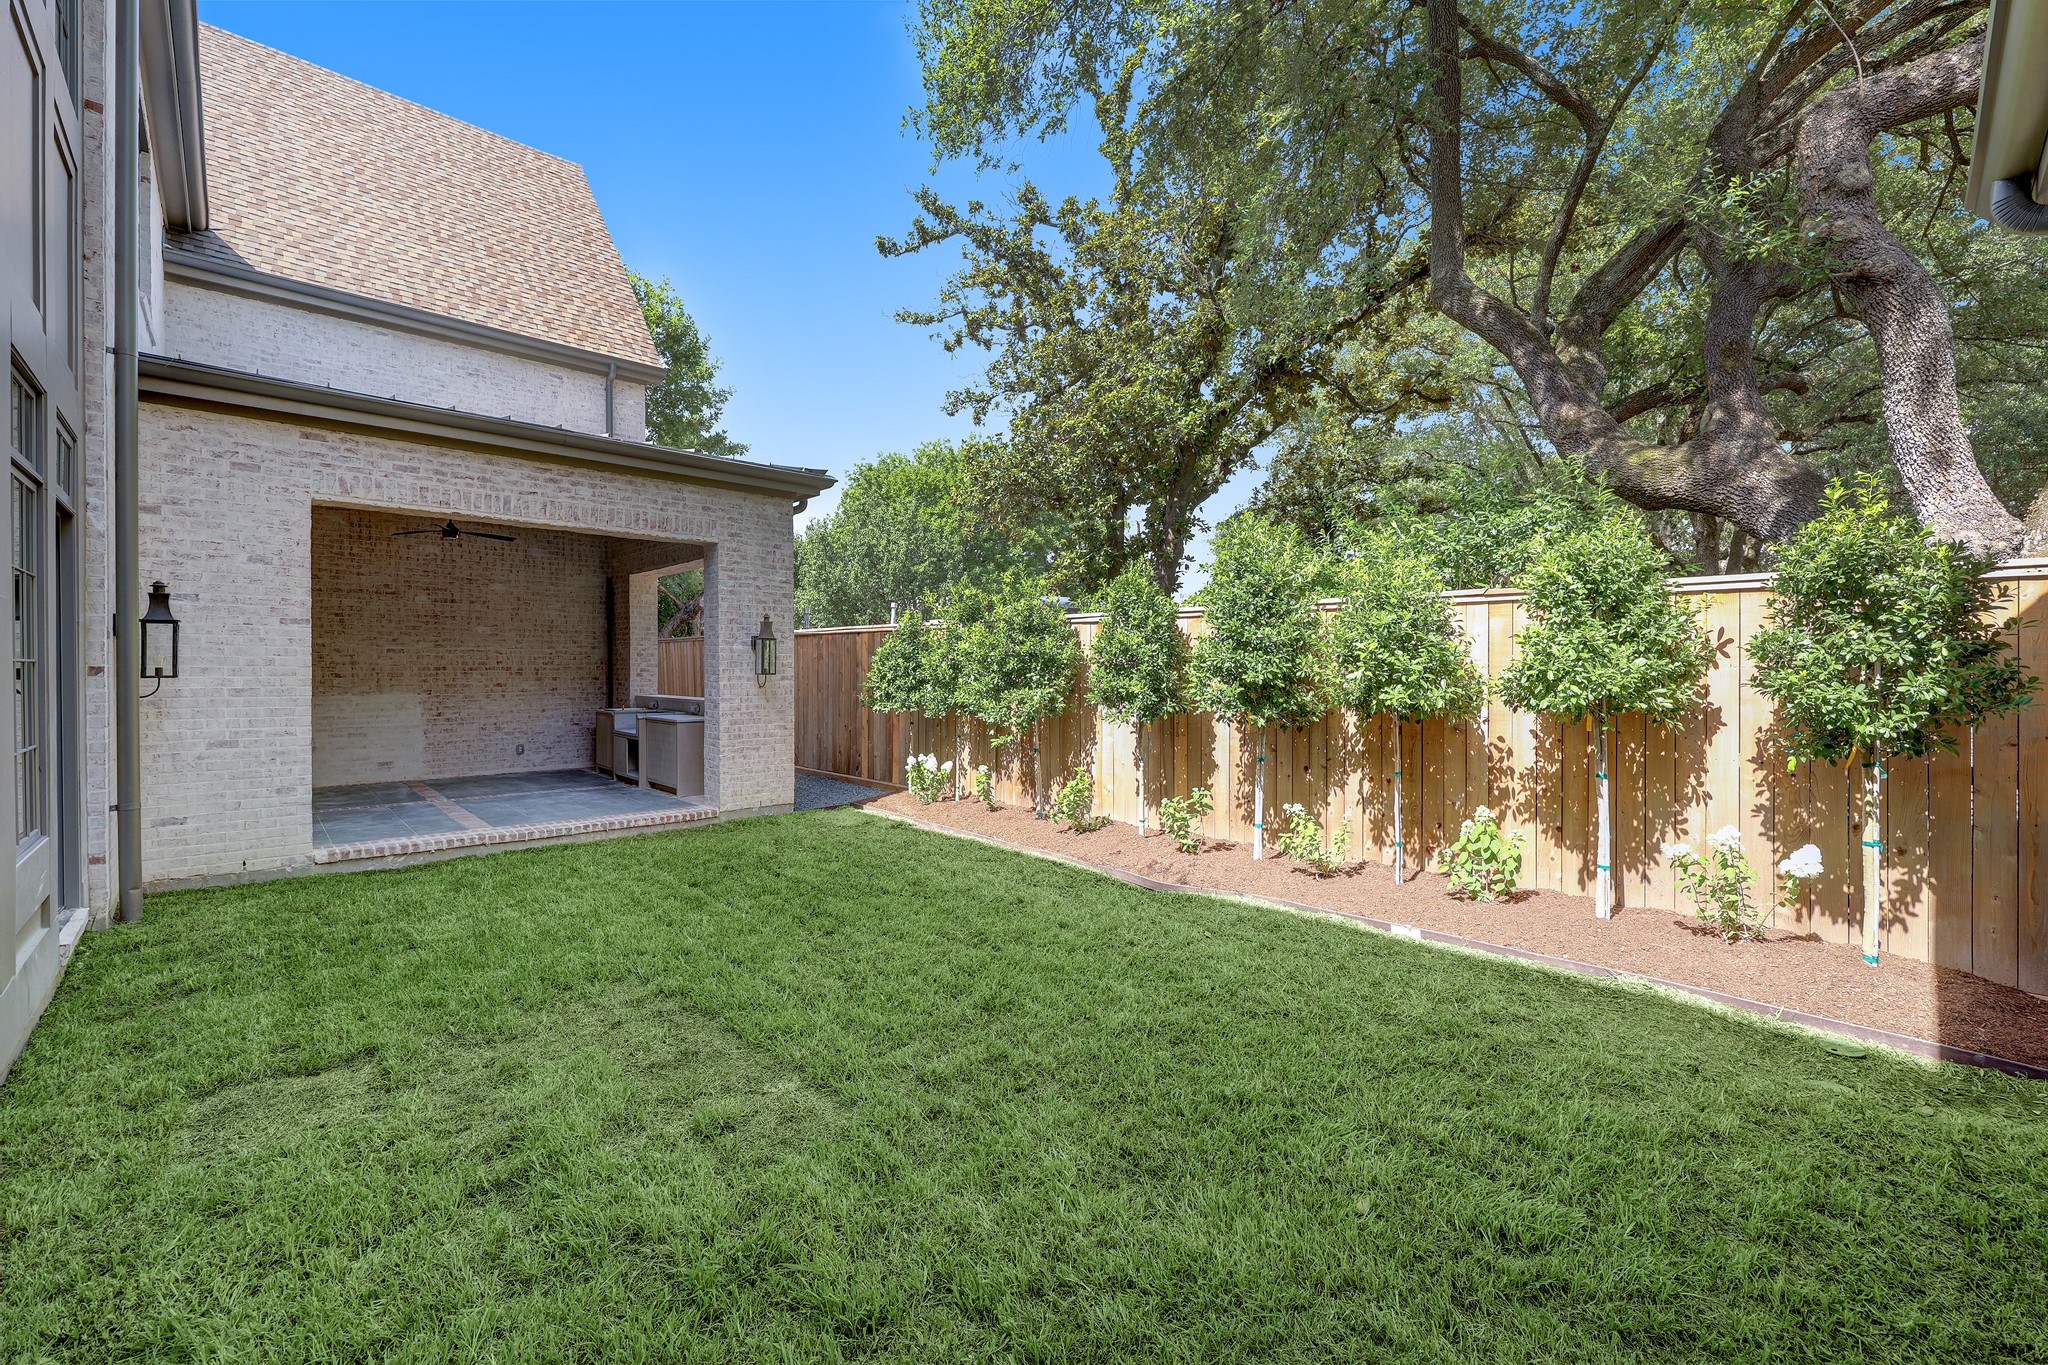 Lush landscaping awaits in the backyard, large enough to accommodate a 10'x20' pool if desired.